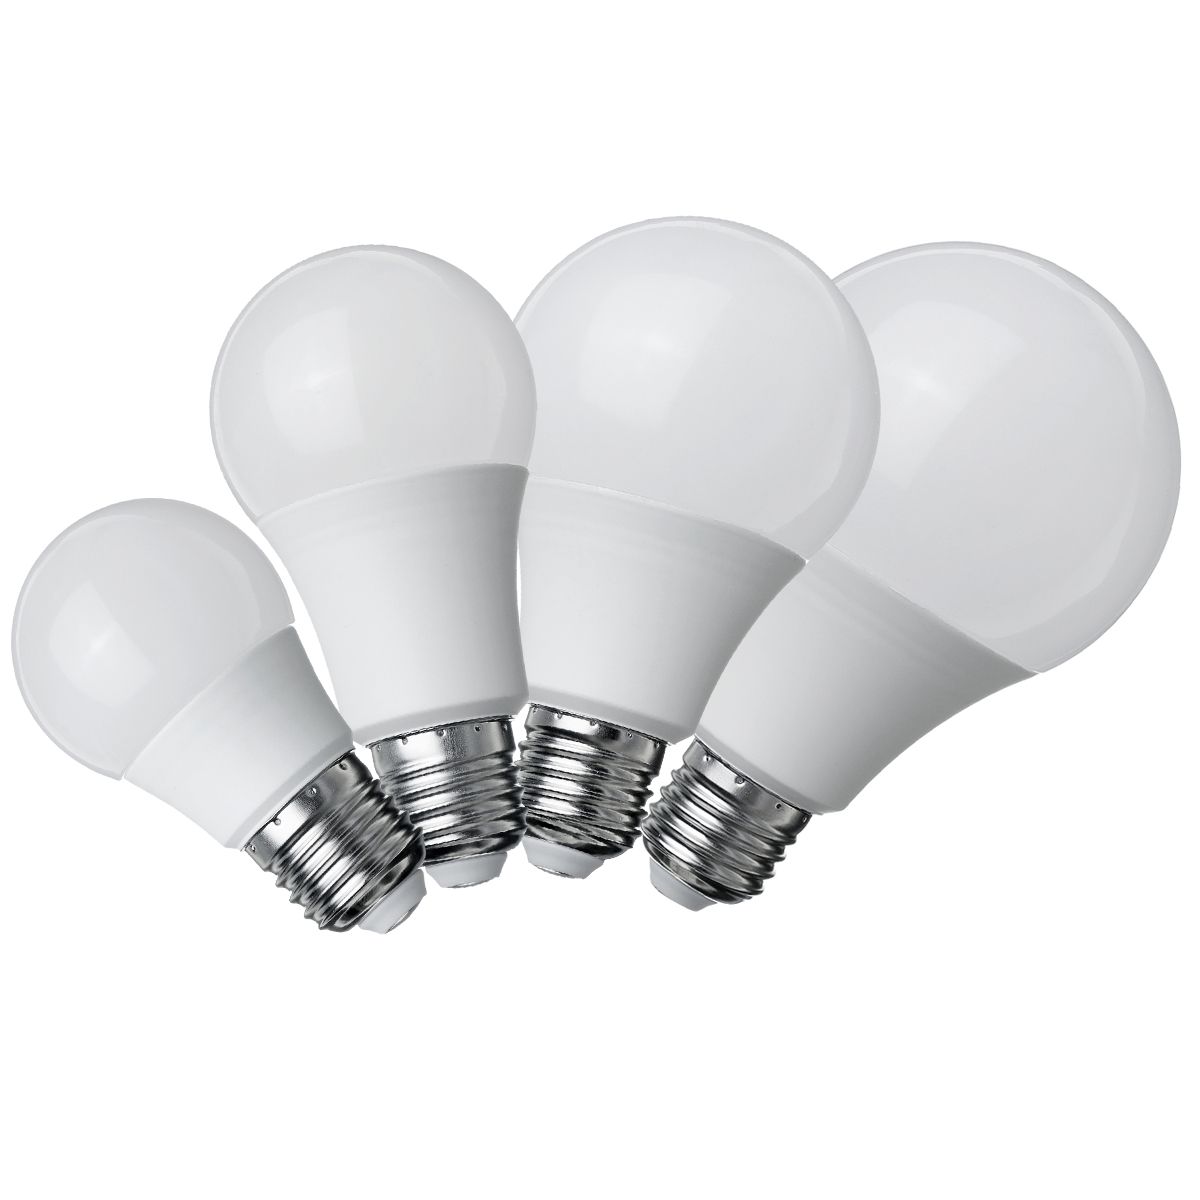 Dimmable-3W-5W-10W-15W-RGBW-16-Colors-E27-LED-Light-Bulb-Indoor-Lamp-With-24-Key-Remote-Control-85-2-1629189